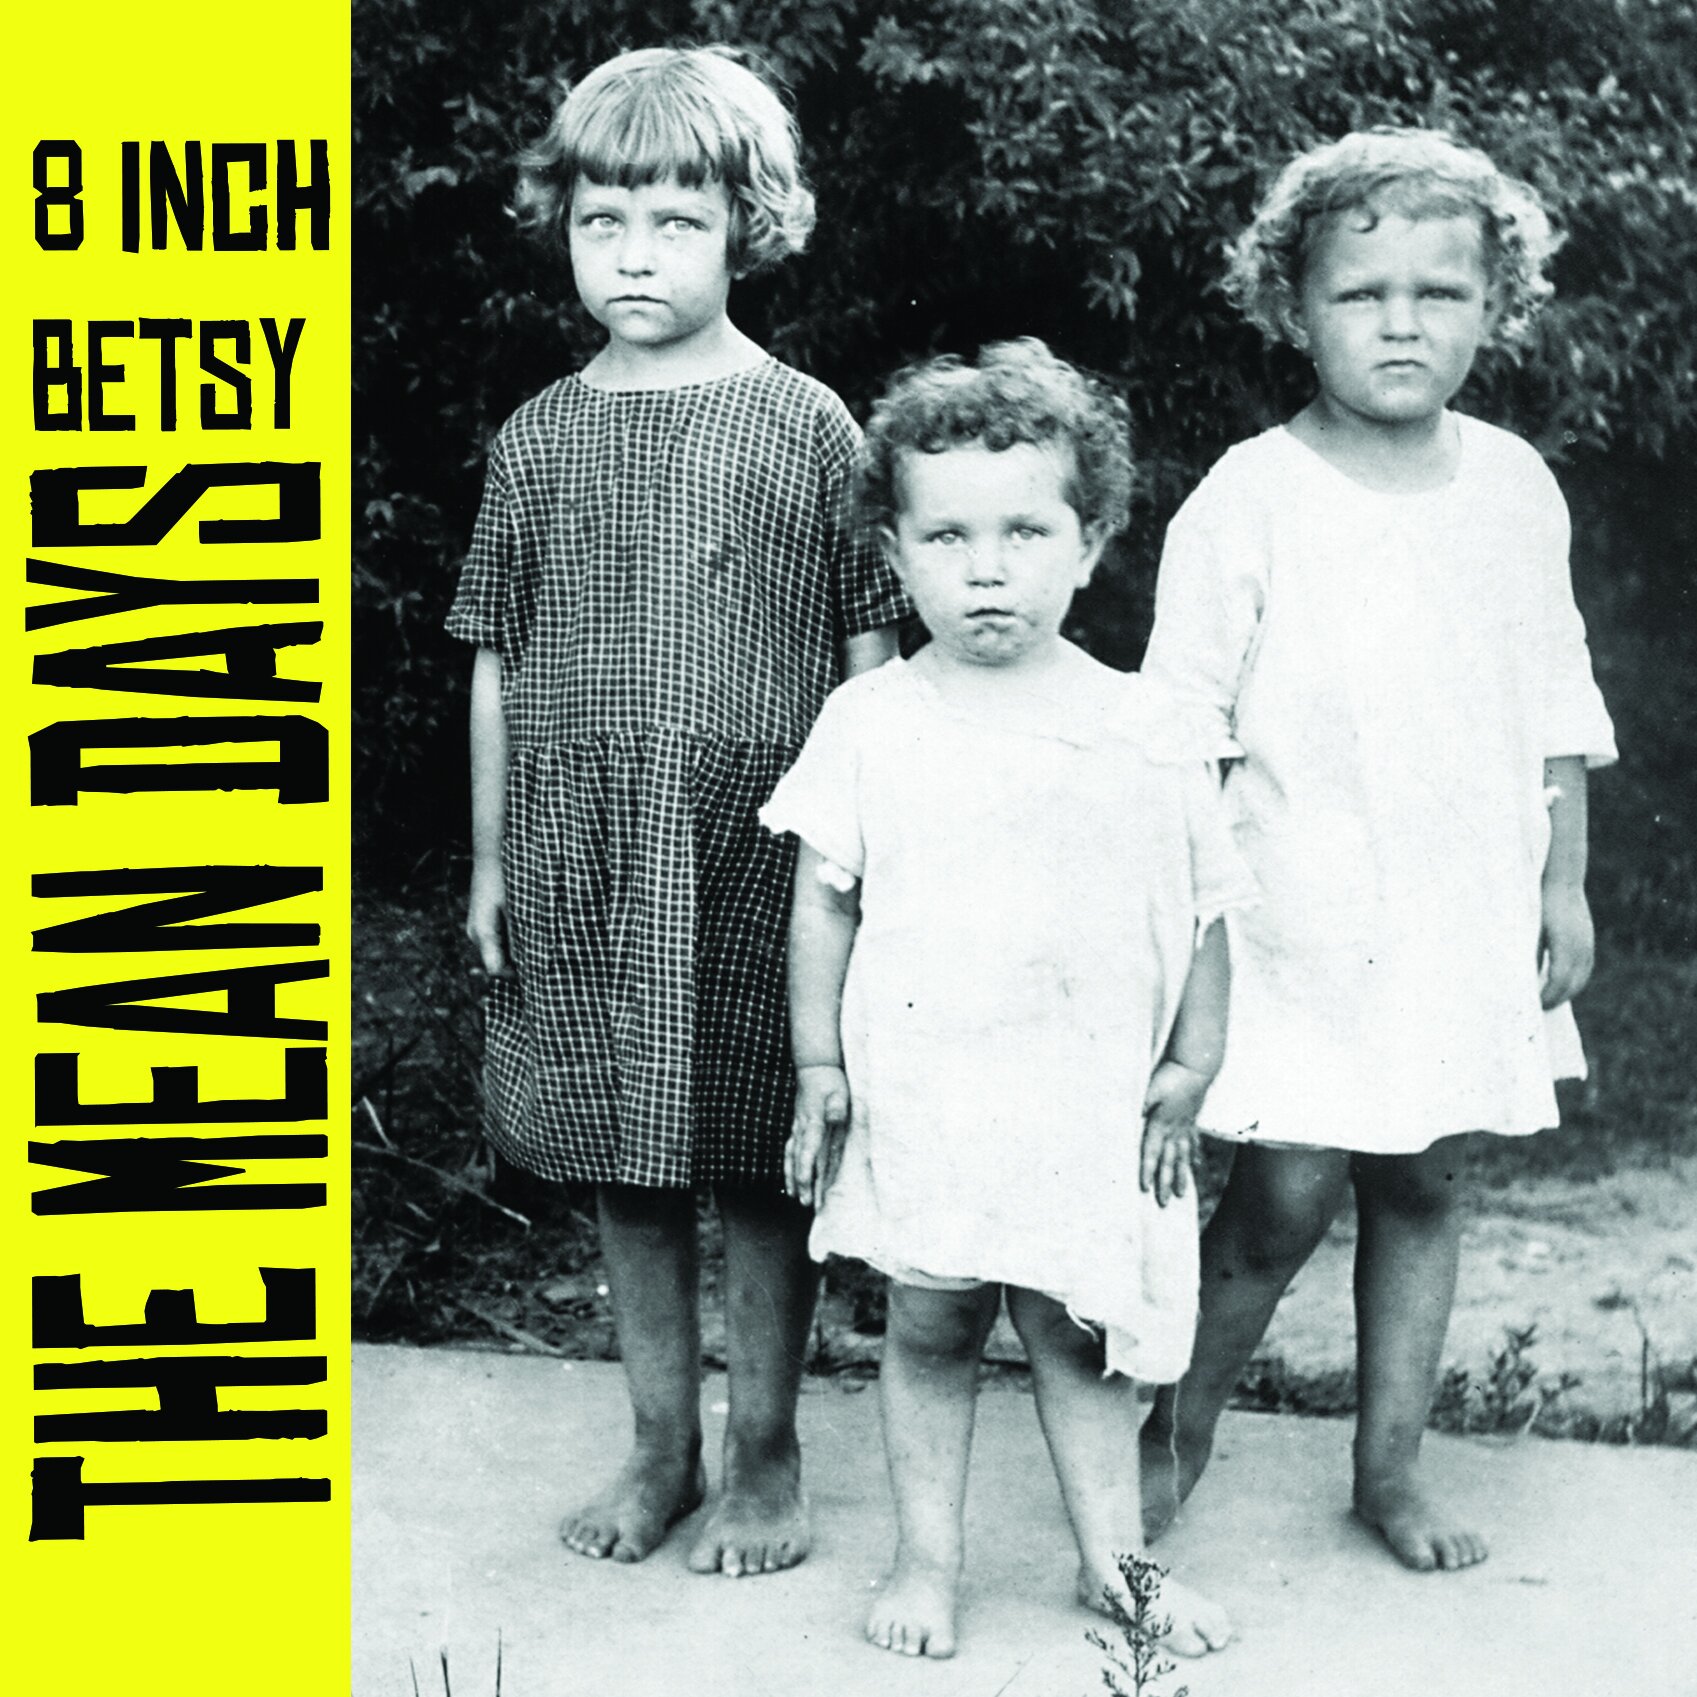 8 Inch Betsy - The Mean Days